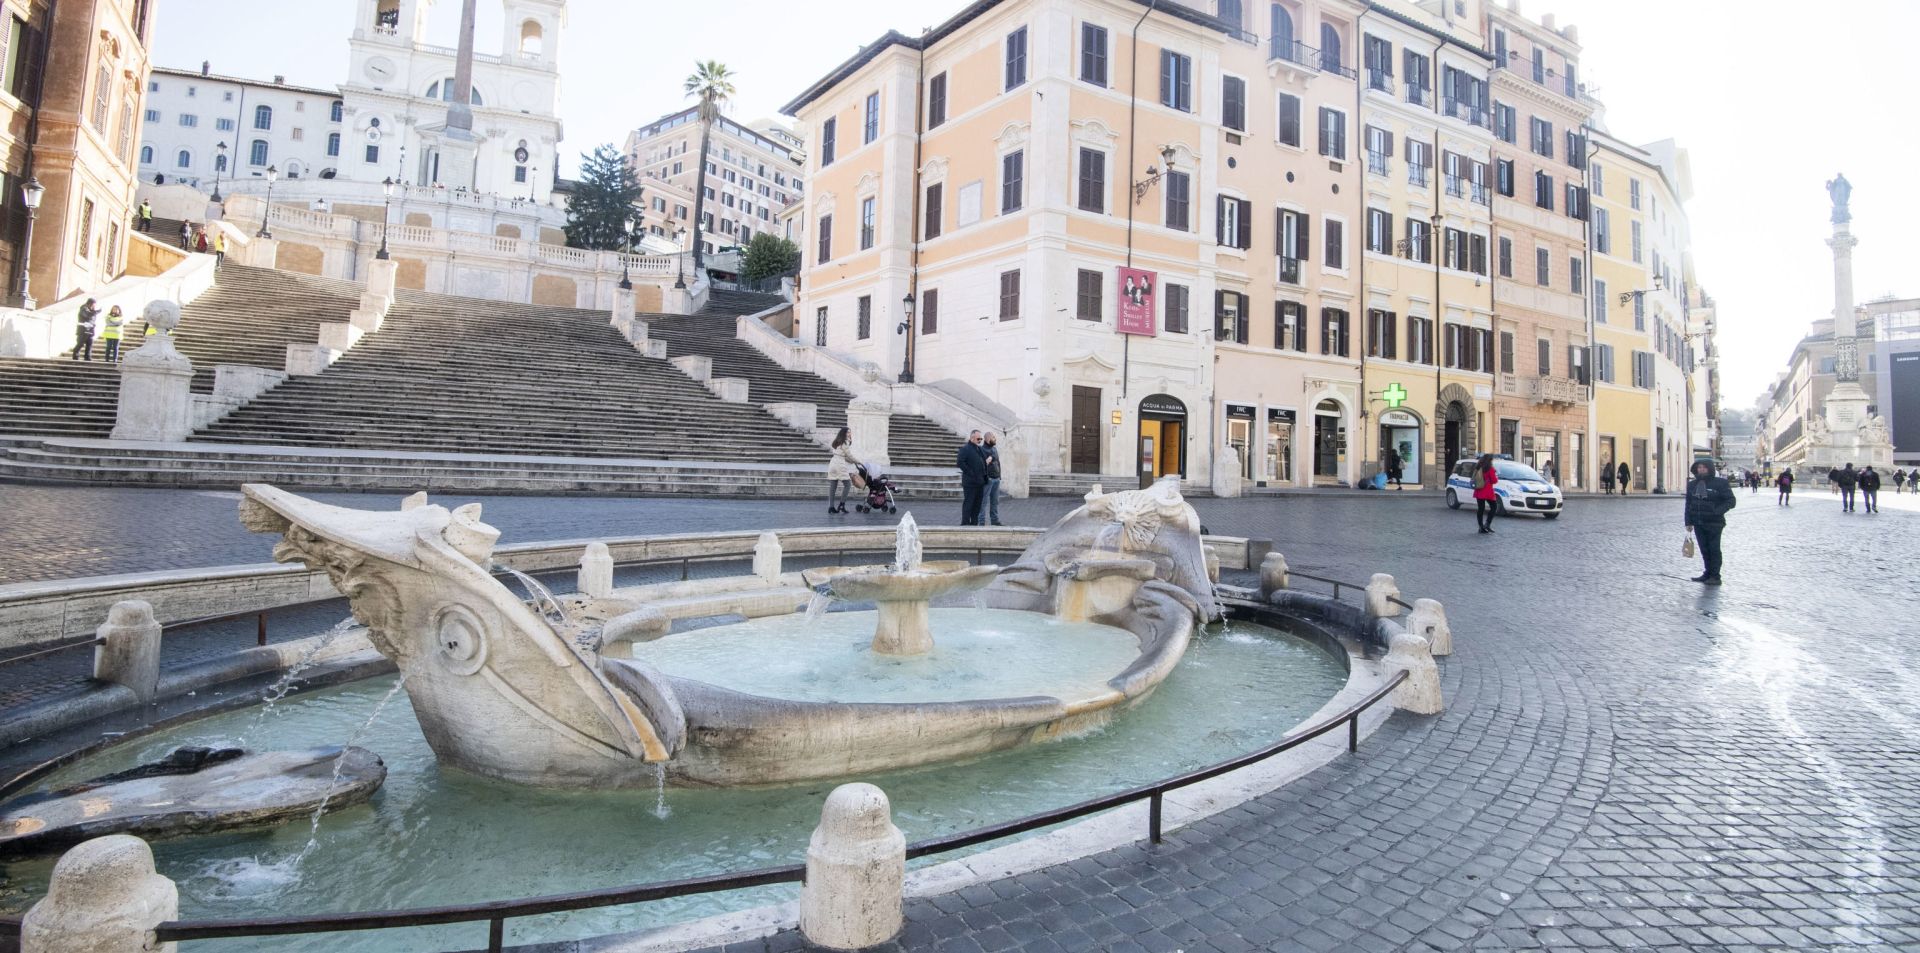 epa08268806 The Spanish Steps are almost deserted due to the Coronavirus emergency, in Rome, Italy, 04 March 2020. The coronavirus is expected to cost Italy's tourism sector 7.4 billion euros losses in the upcoming trimester - March 1-May 31 - with an estimated loss of 31,625 tourists over that quarter, the confederation representing businesses in the sector Confturismo-Confcommercio said.  EPA/CLAUDIO PERI